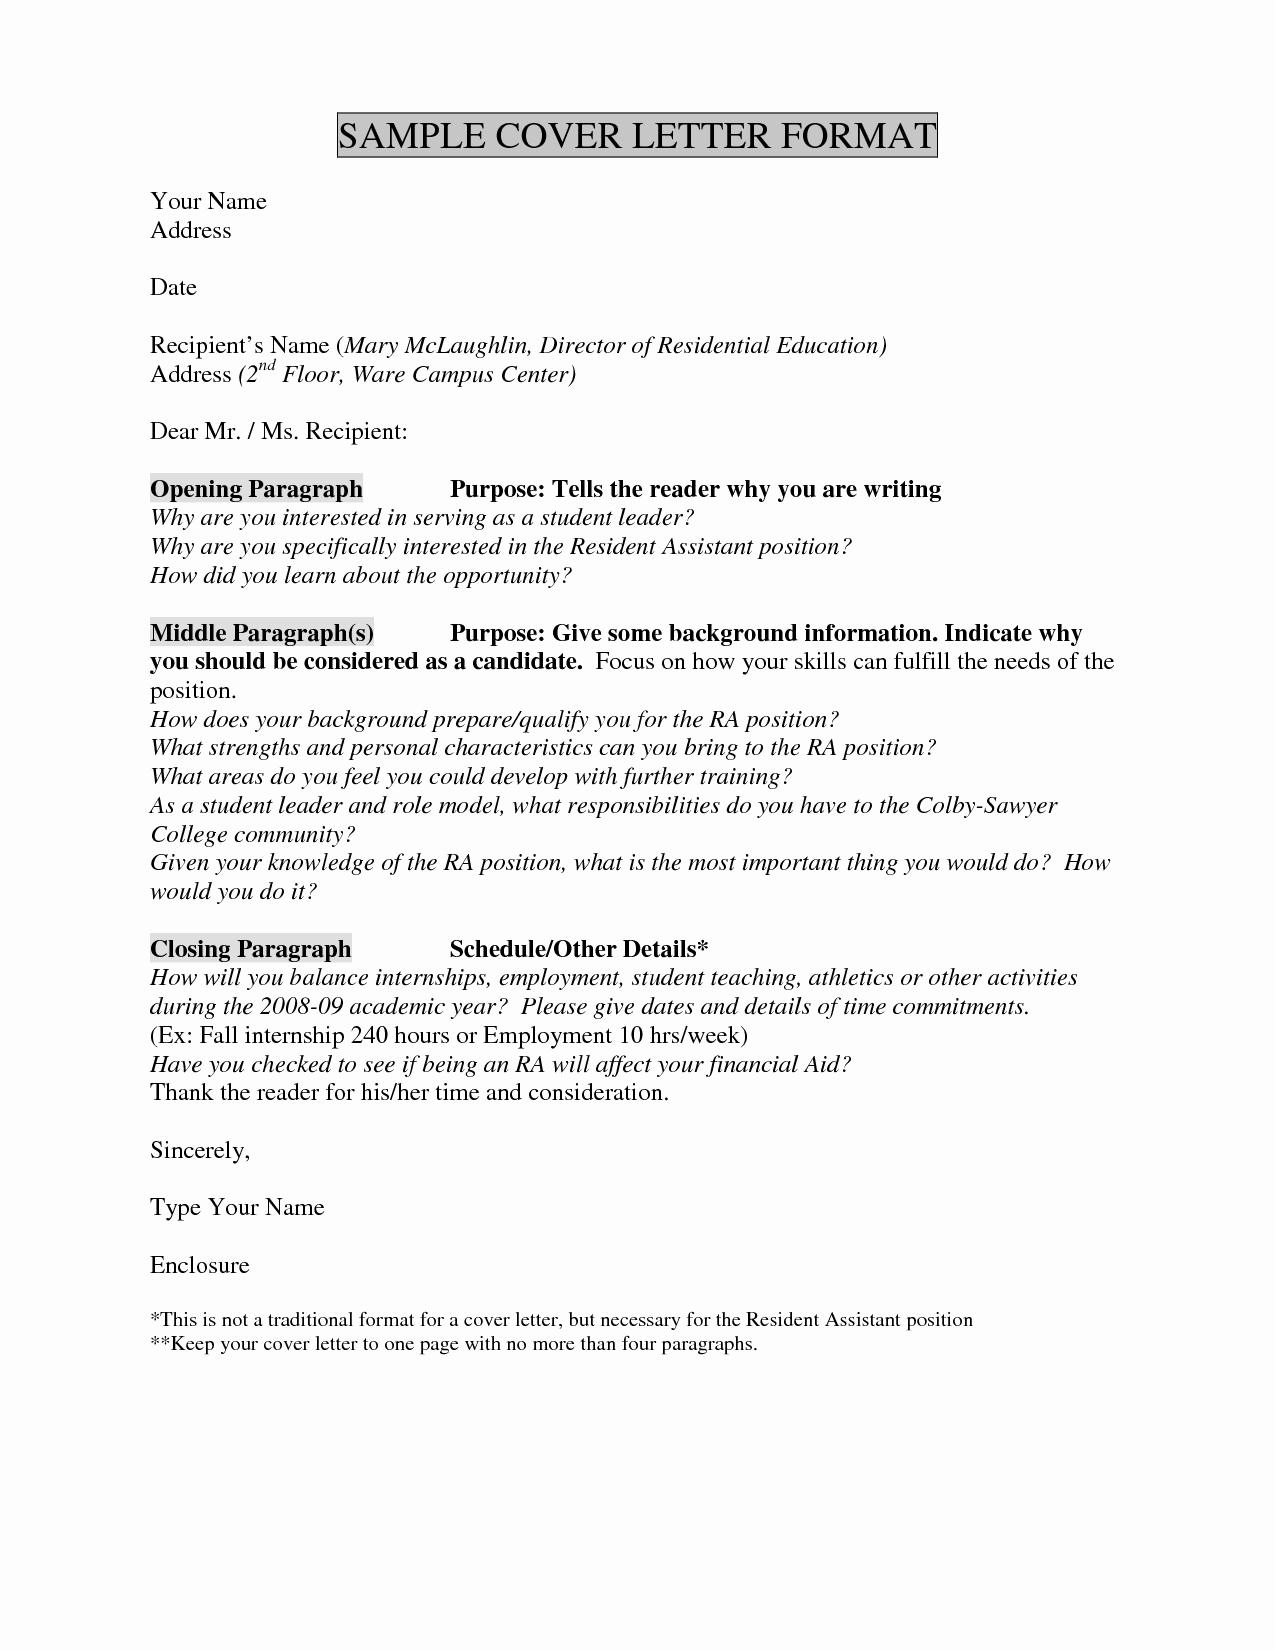 Internship Cover Letter Template - Internship Cover Letter Template Best Unique if I Apply to More